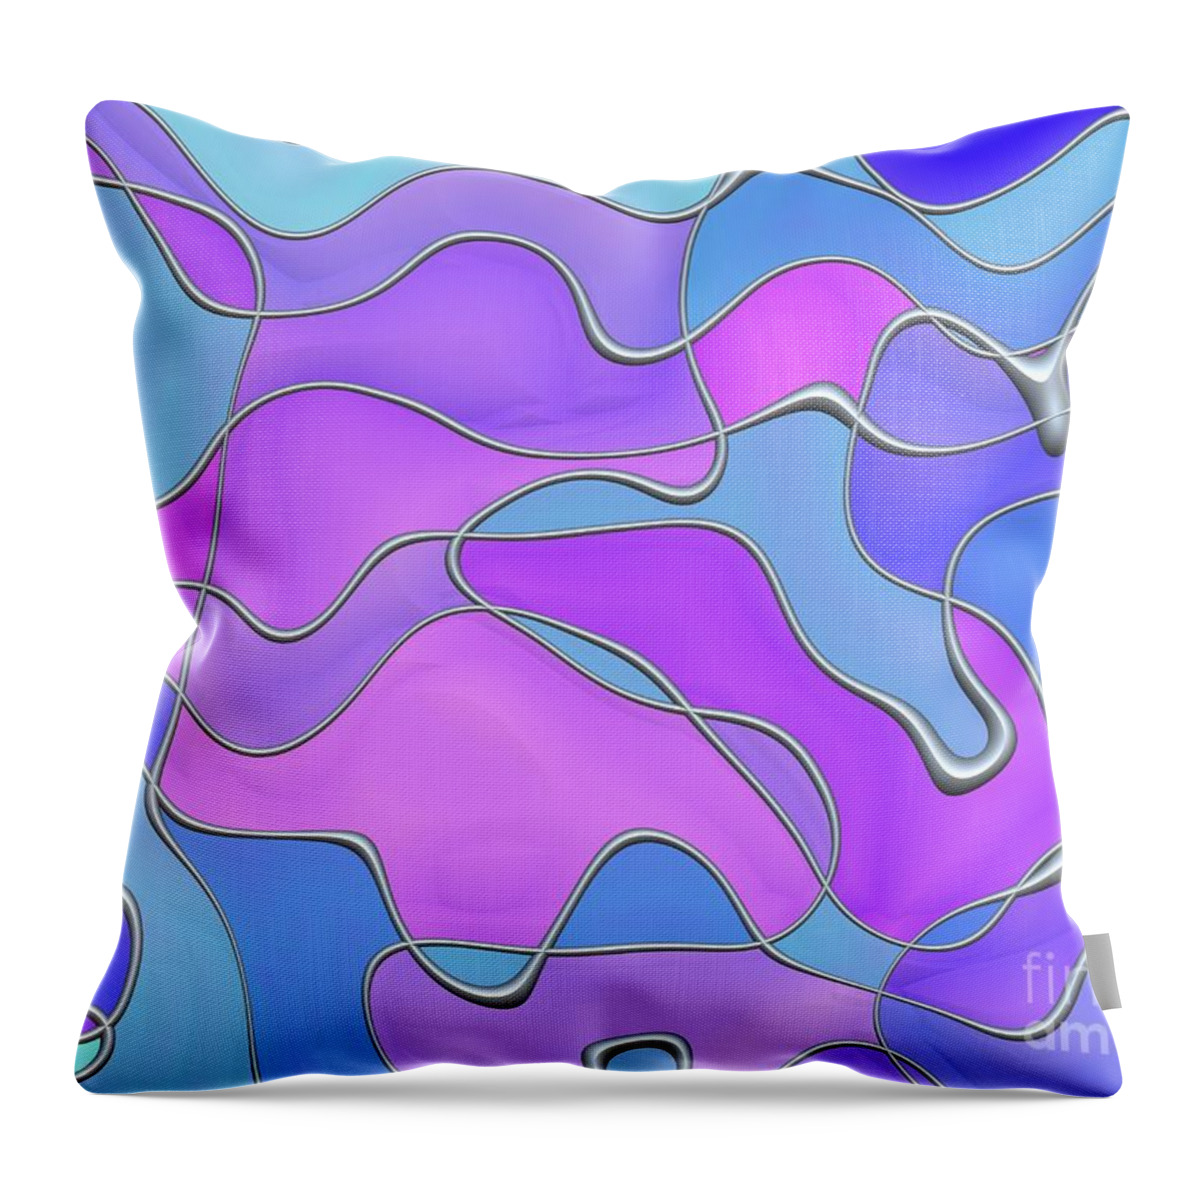 Abstract Throw Pillow featuring the digital art Lignes en Folie - 02a by Variance Collections